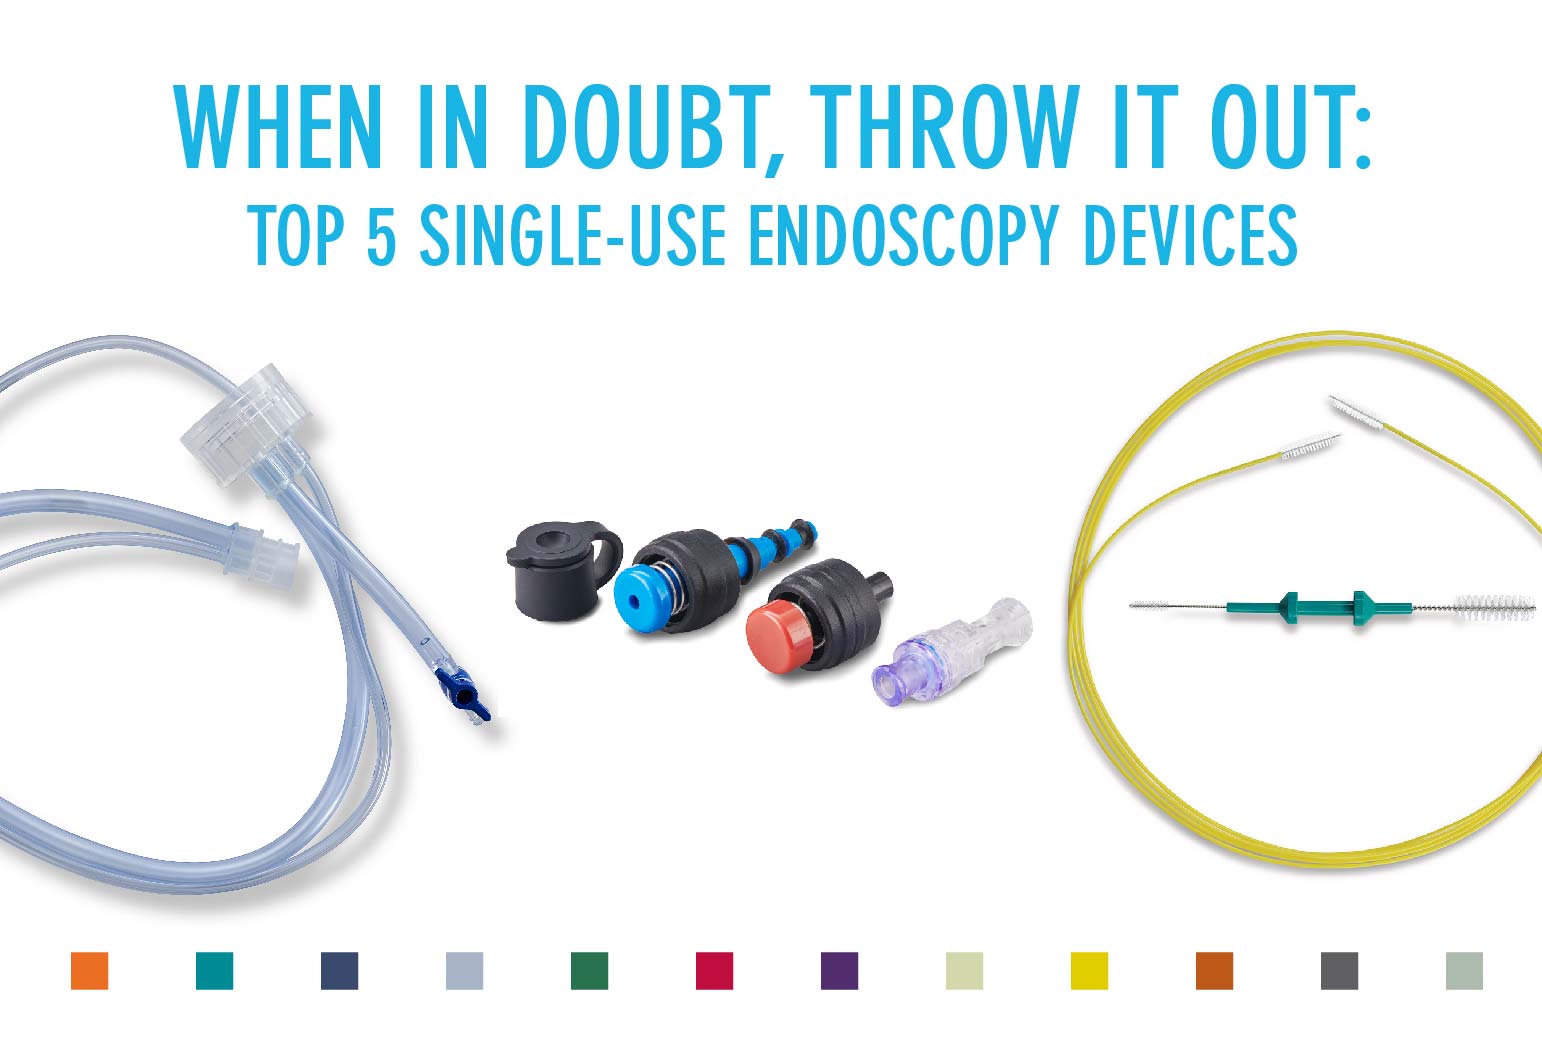 When in Doubt, Throw it Out: Top 5 Single-Use Endoscopy Devices 